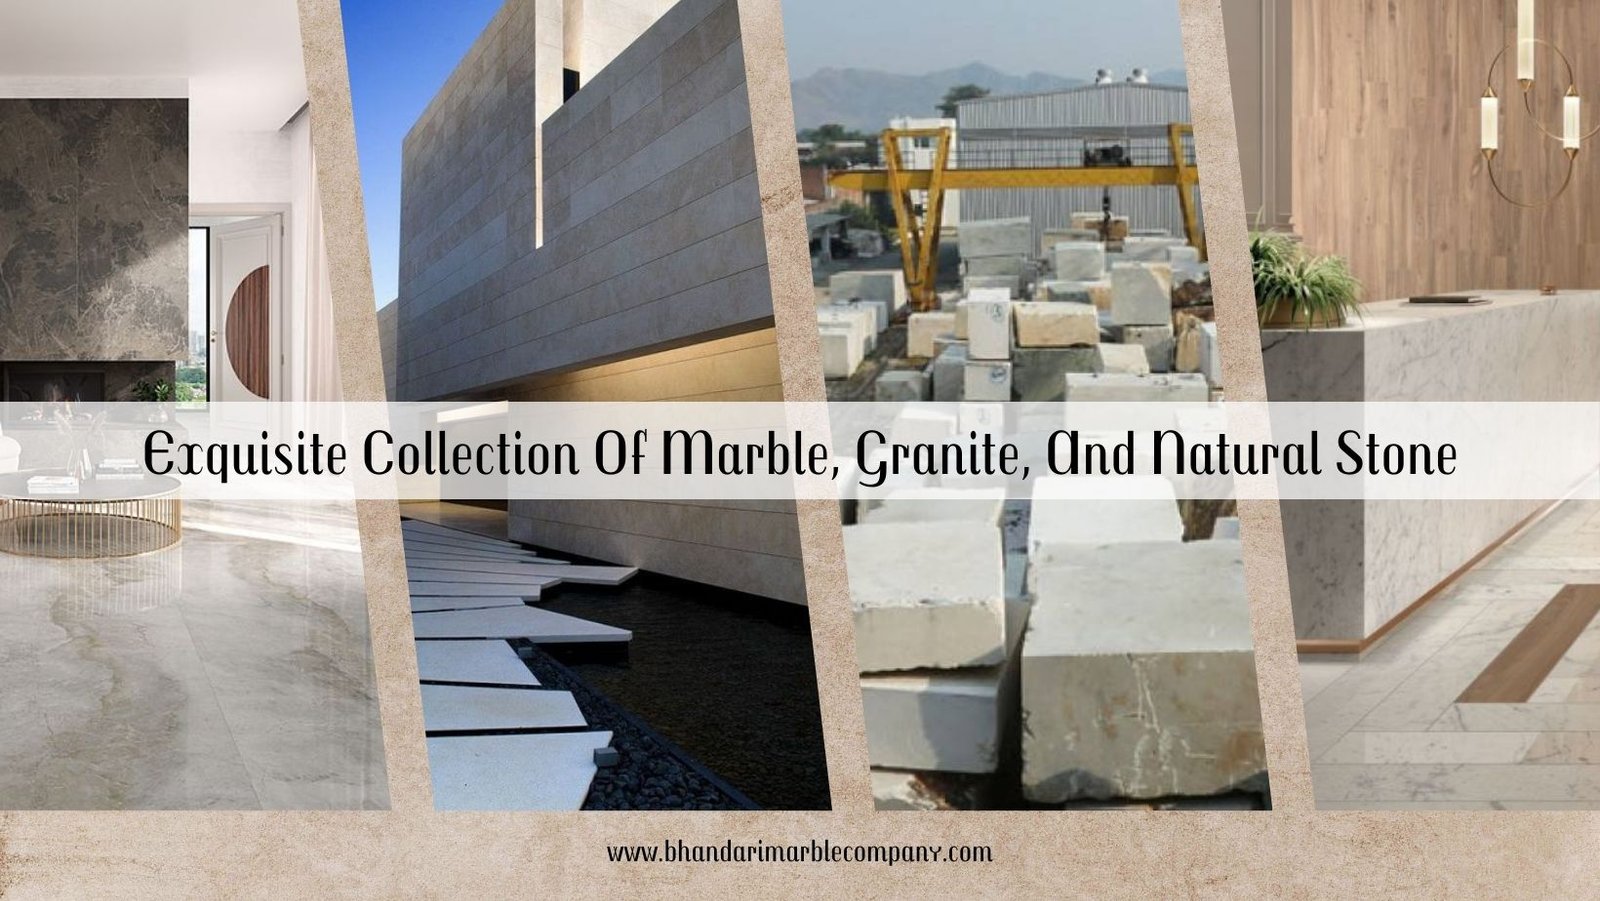 Exquisite Collection Of Marble, Granite, And Natural Stone